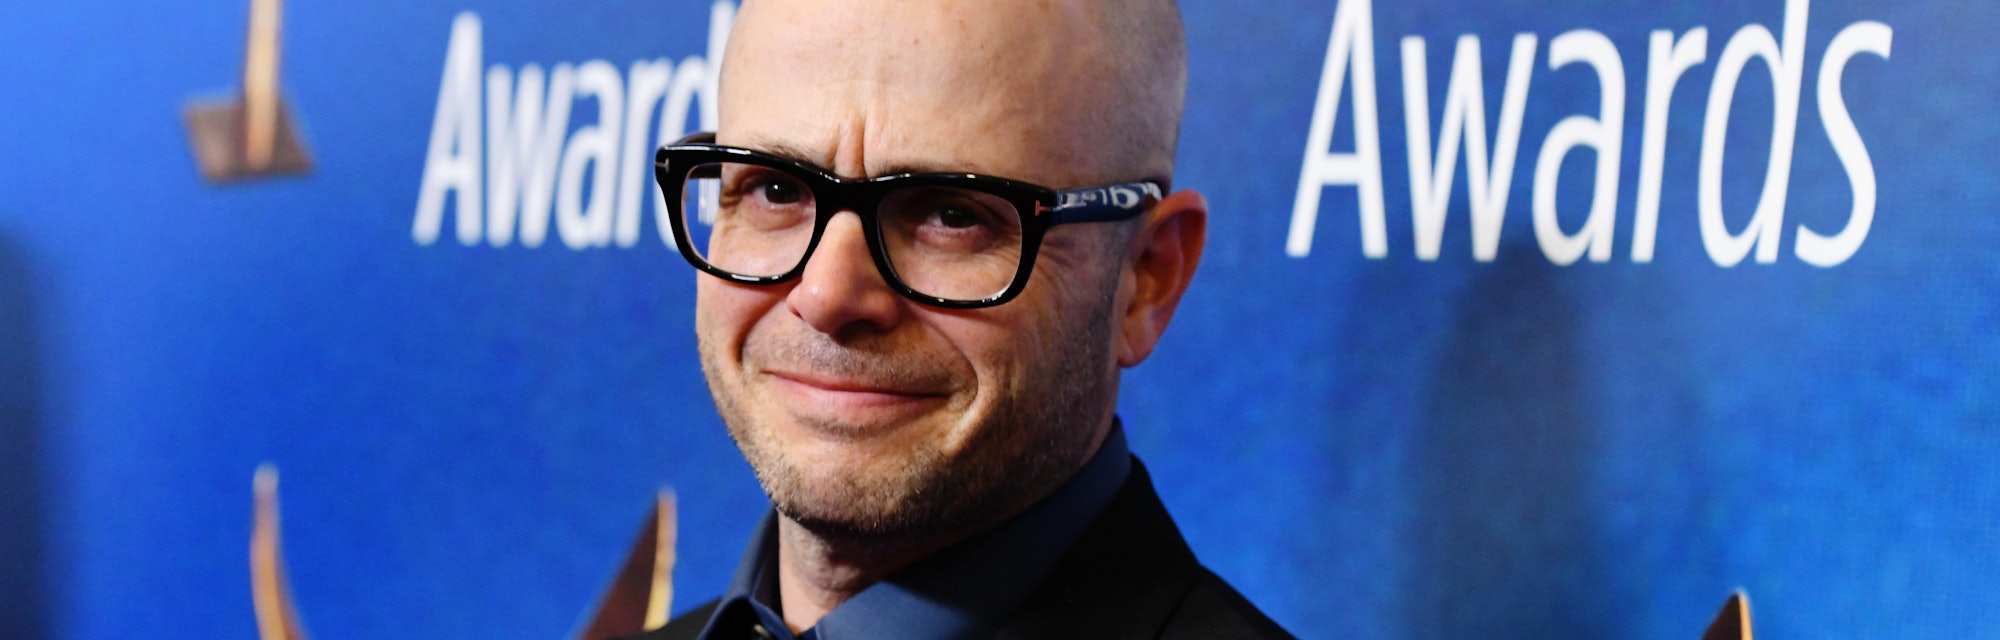 BEVERLY HILLS, CALIFORNIA - FEBRUARY 01: Damon Lindelof attends the 2020 Writers Guild Awards West C...